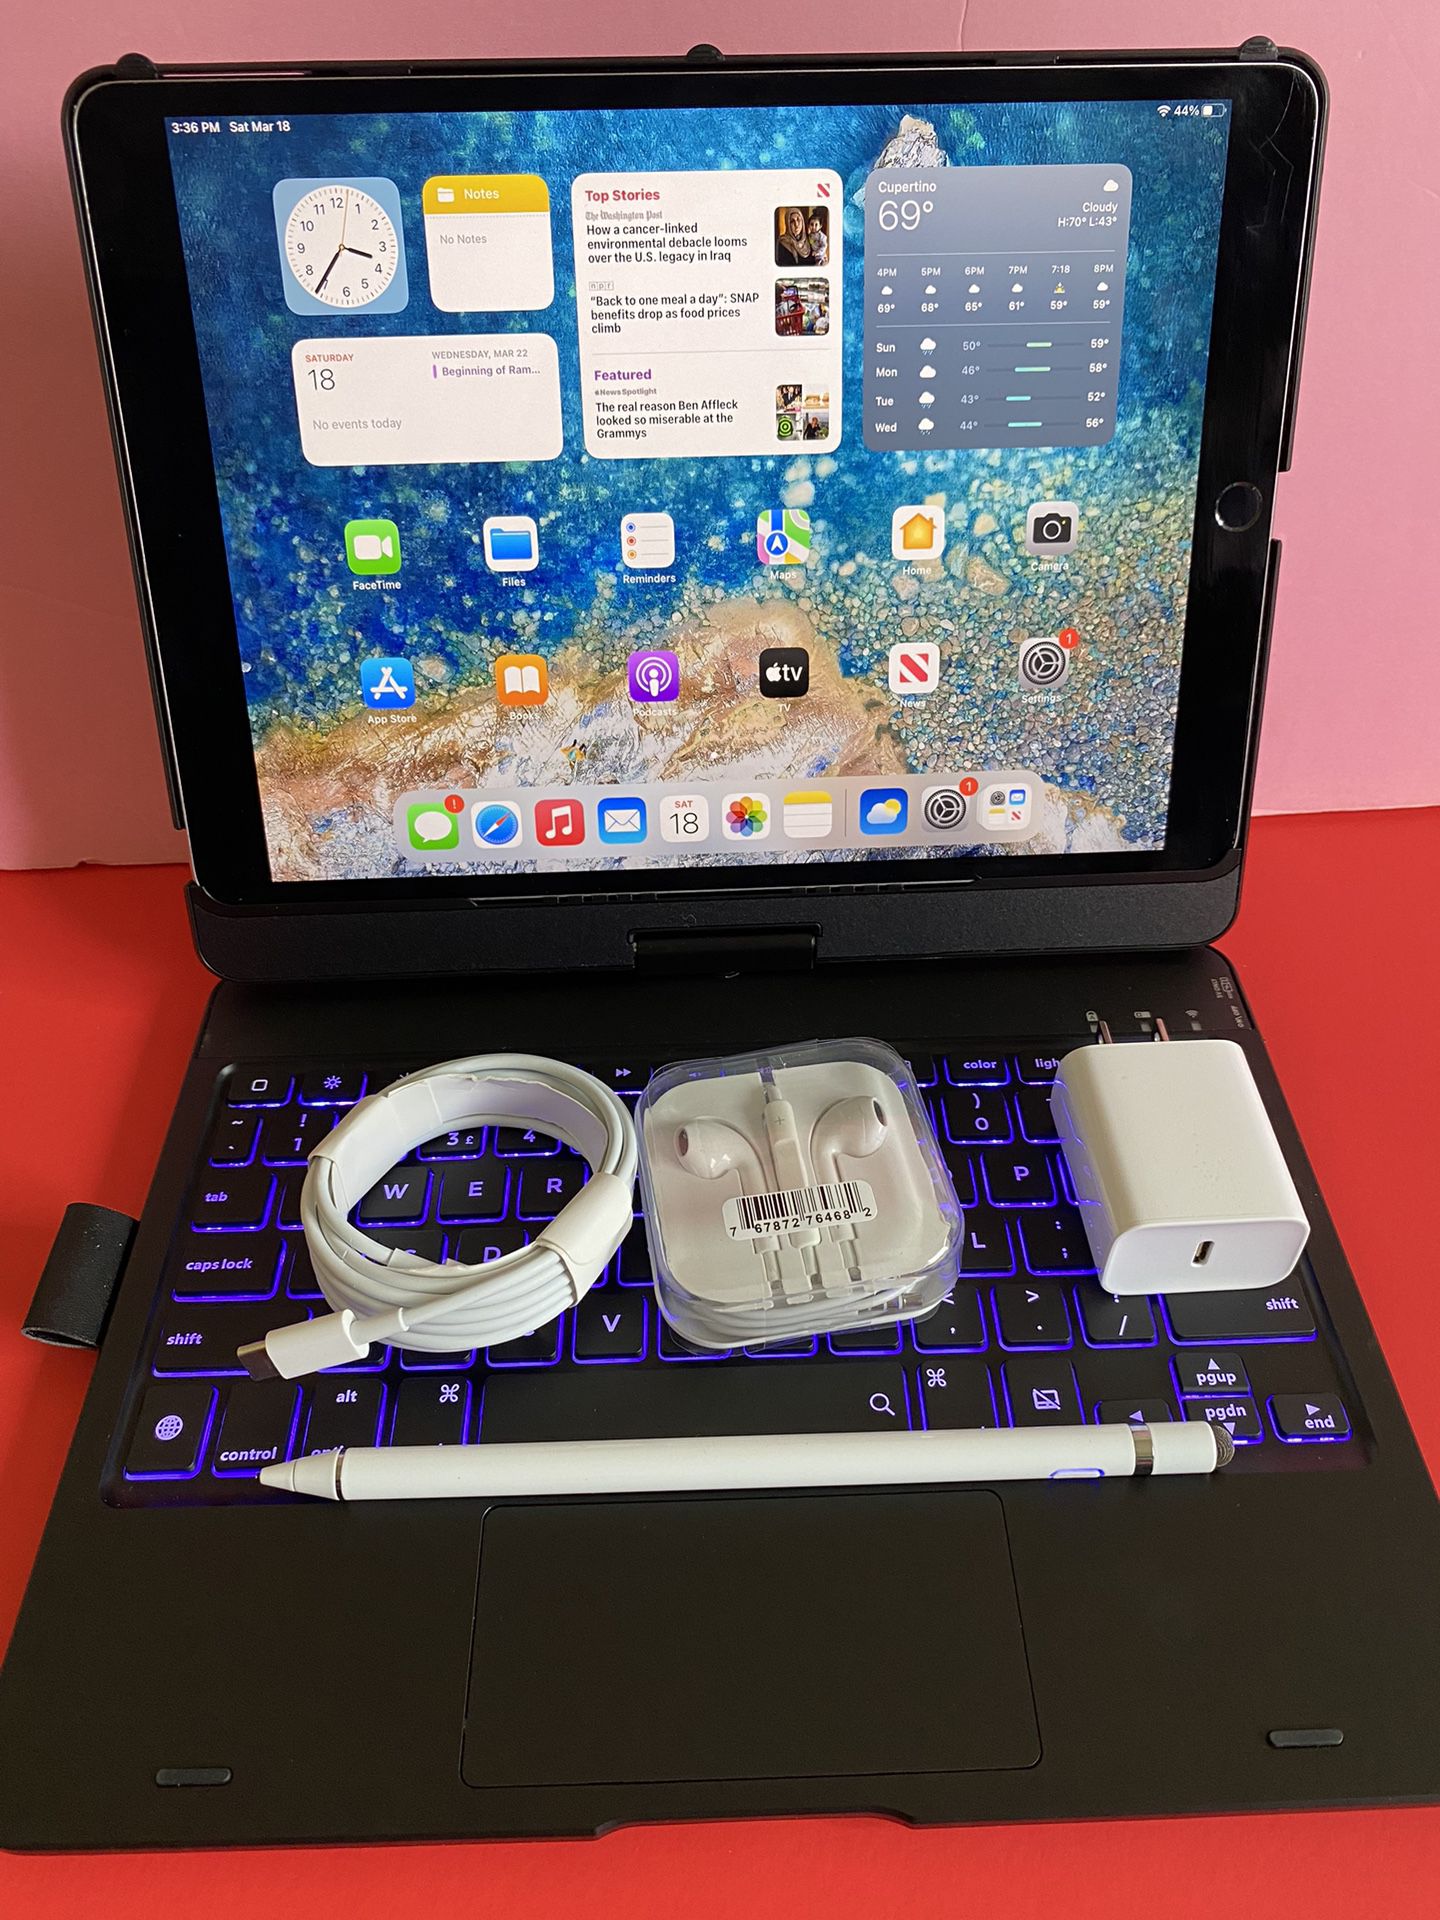 Apple IPad Pro 10.5” (Retina Display/ latest 16/ 2017 model) 64GB with keyboard, Stylus pen & (Apple Pencil compatible) for Sale in El Monte, CA - OfferUp